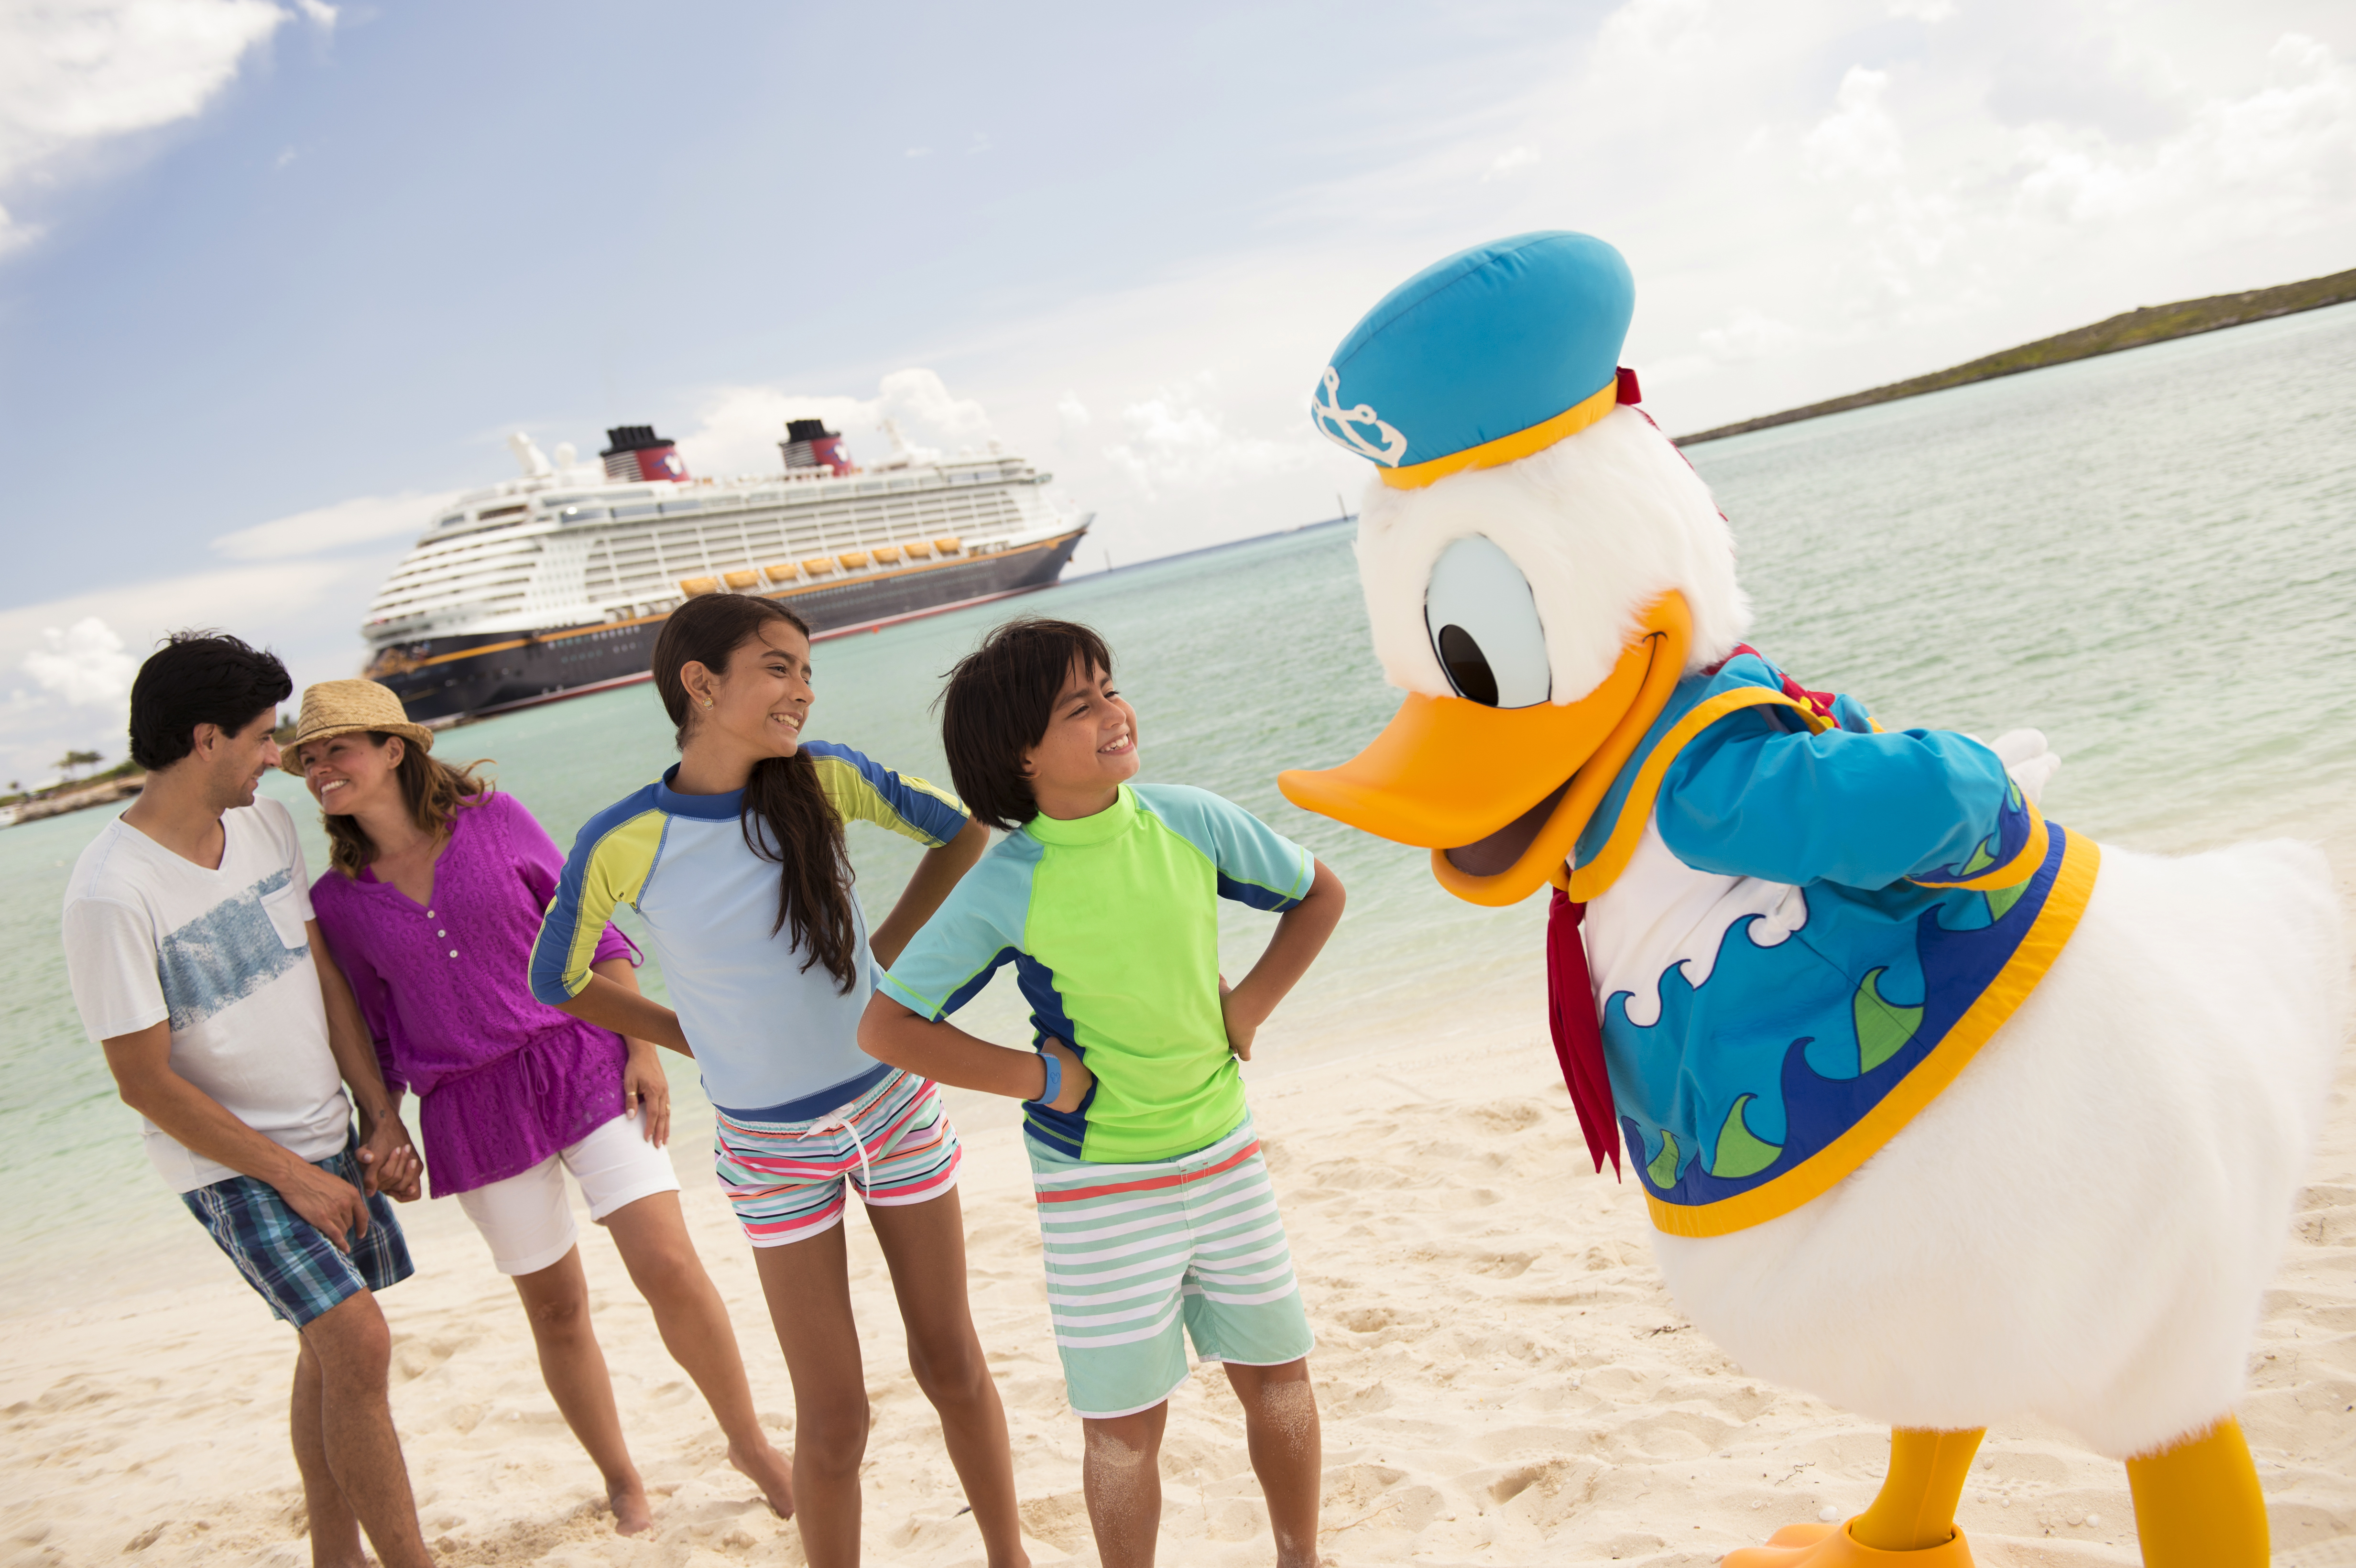 Castaway Cay Photo with Disney Cruise Line